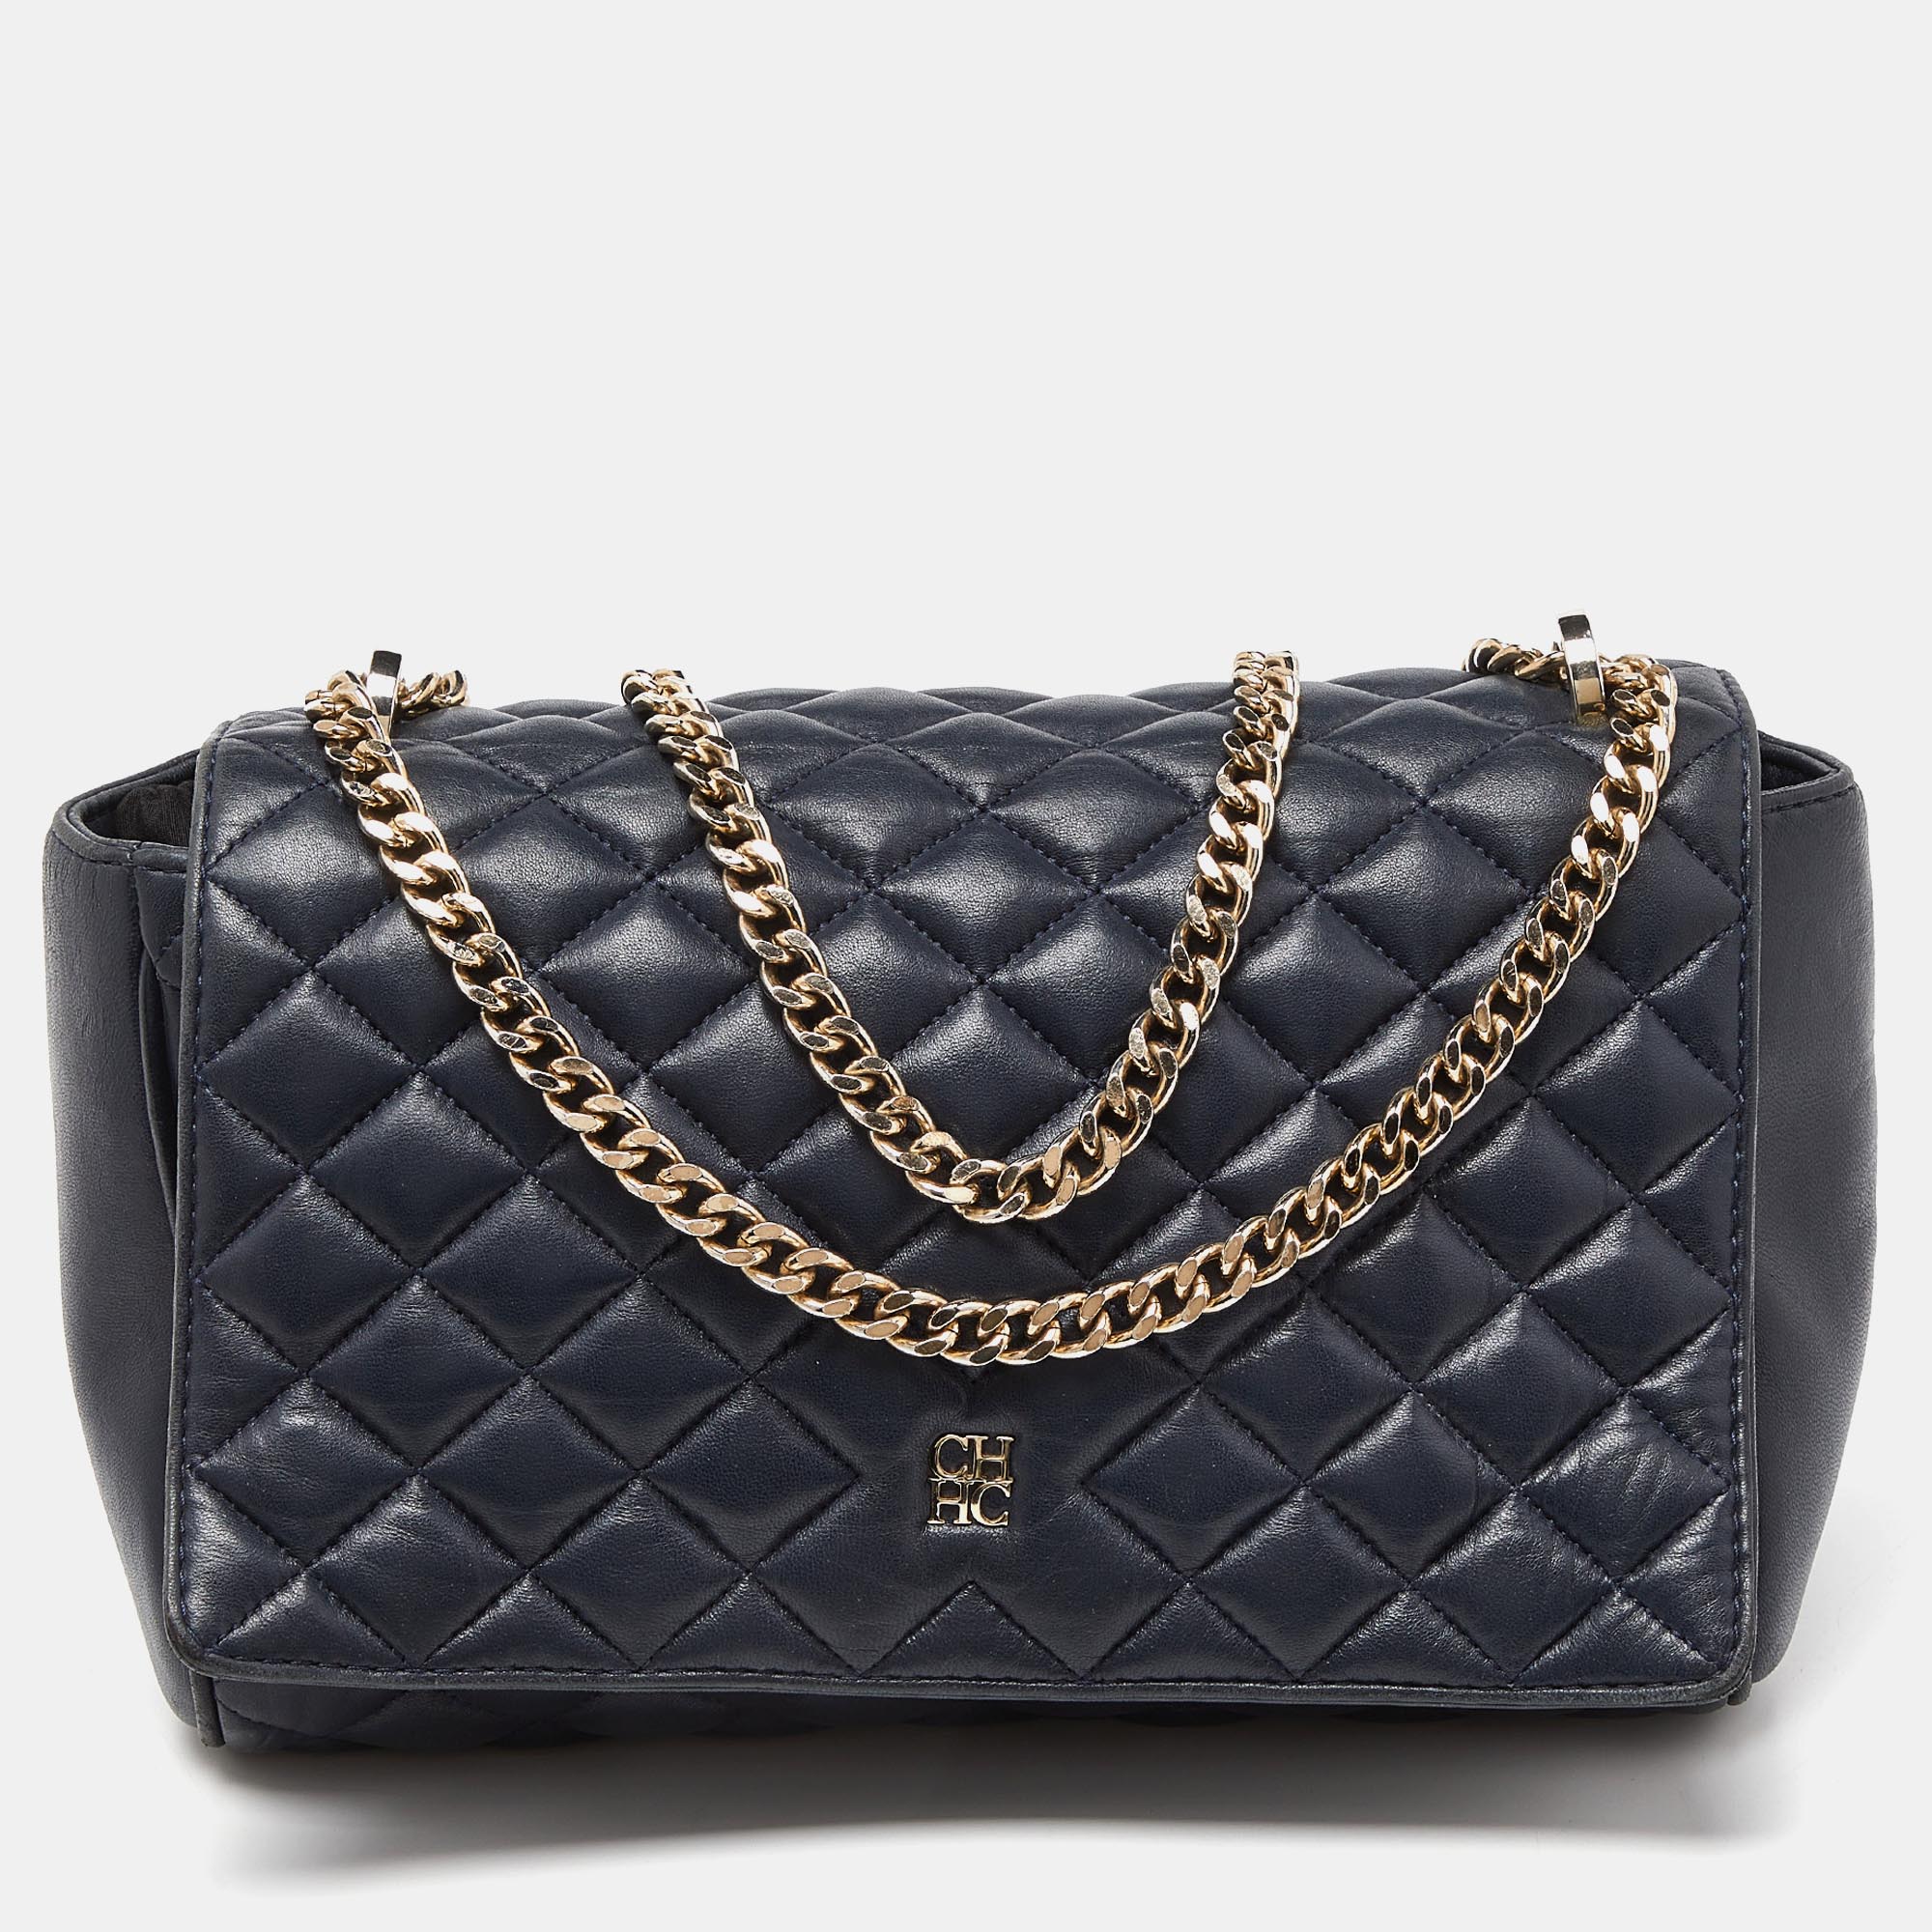 Ch carolina herrera blue quilted leather flap chain shoulder bag